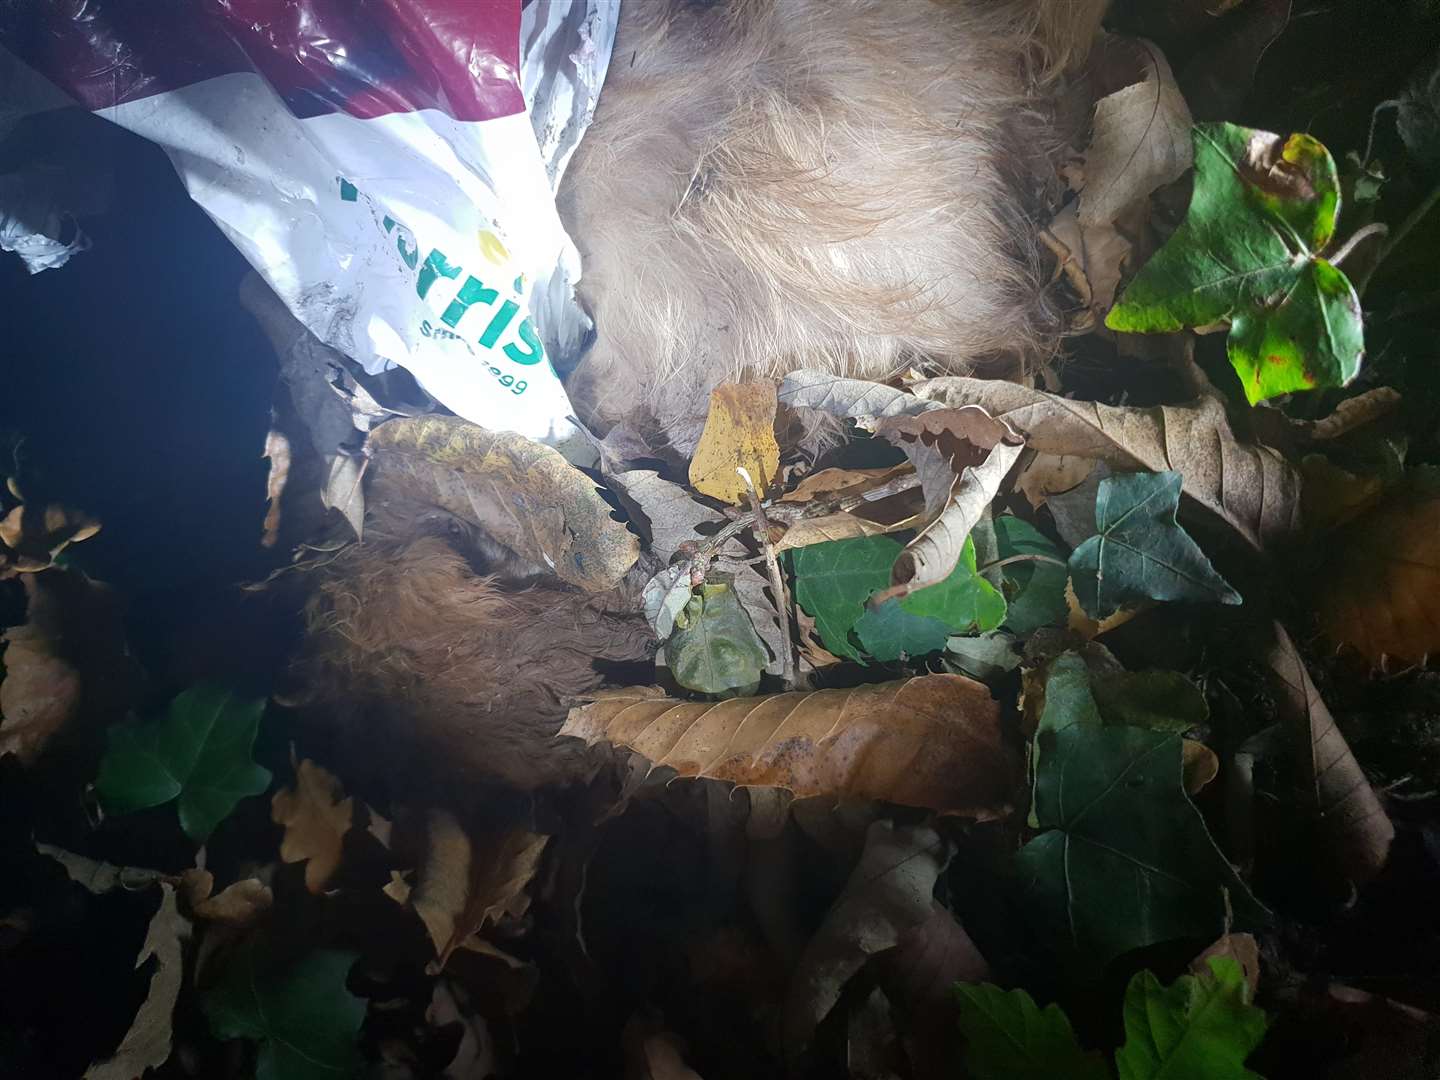 The dead puppy was found in a bag in Chartham Hatch